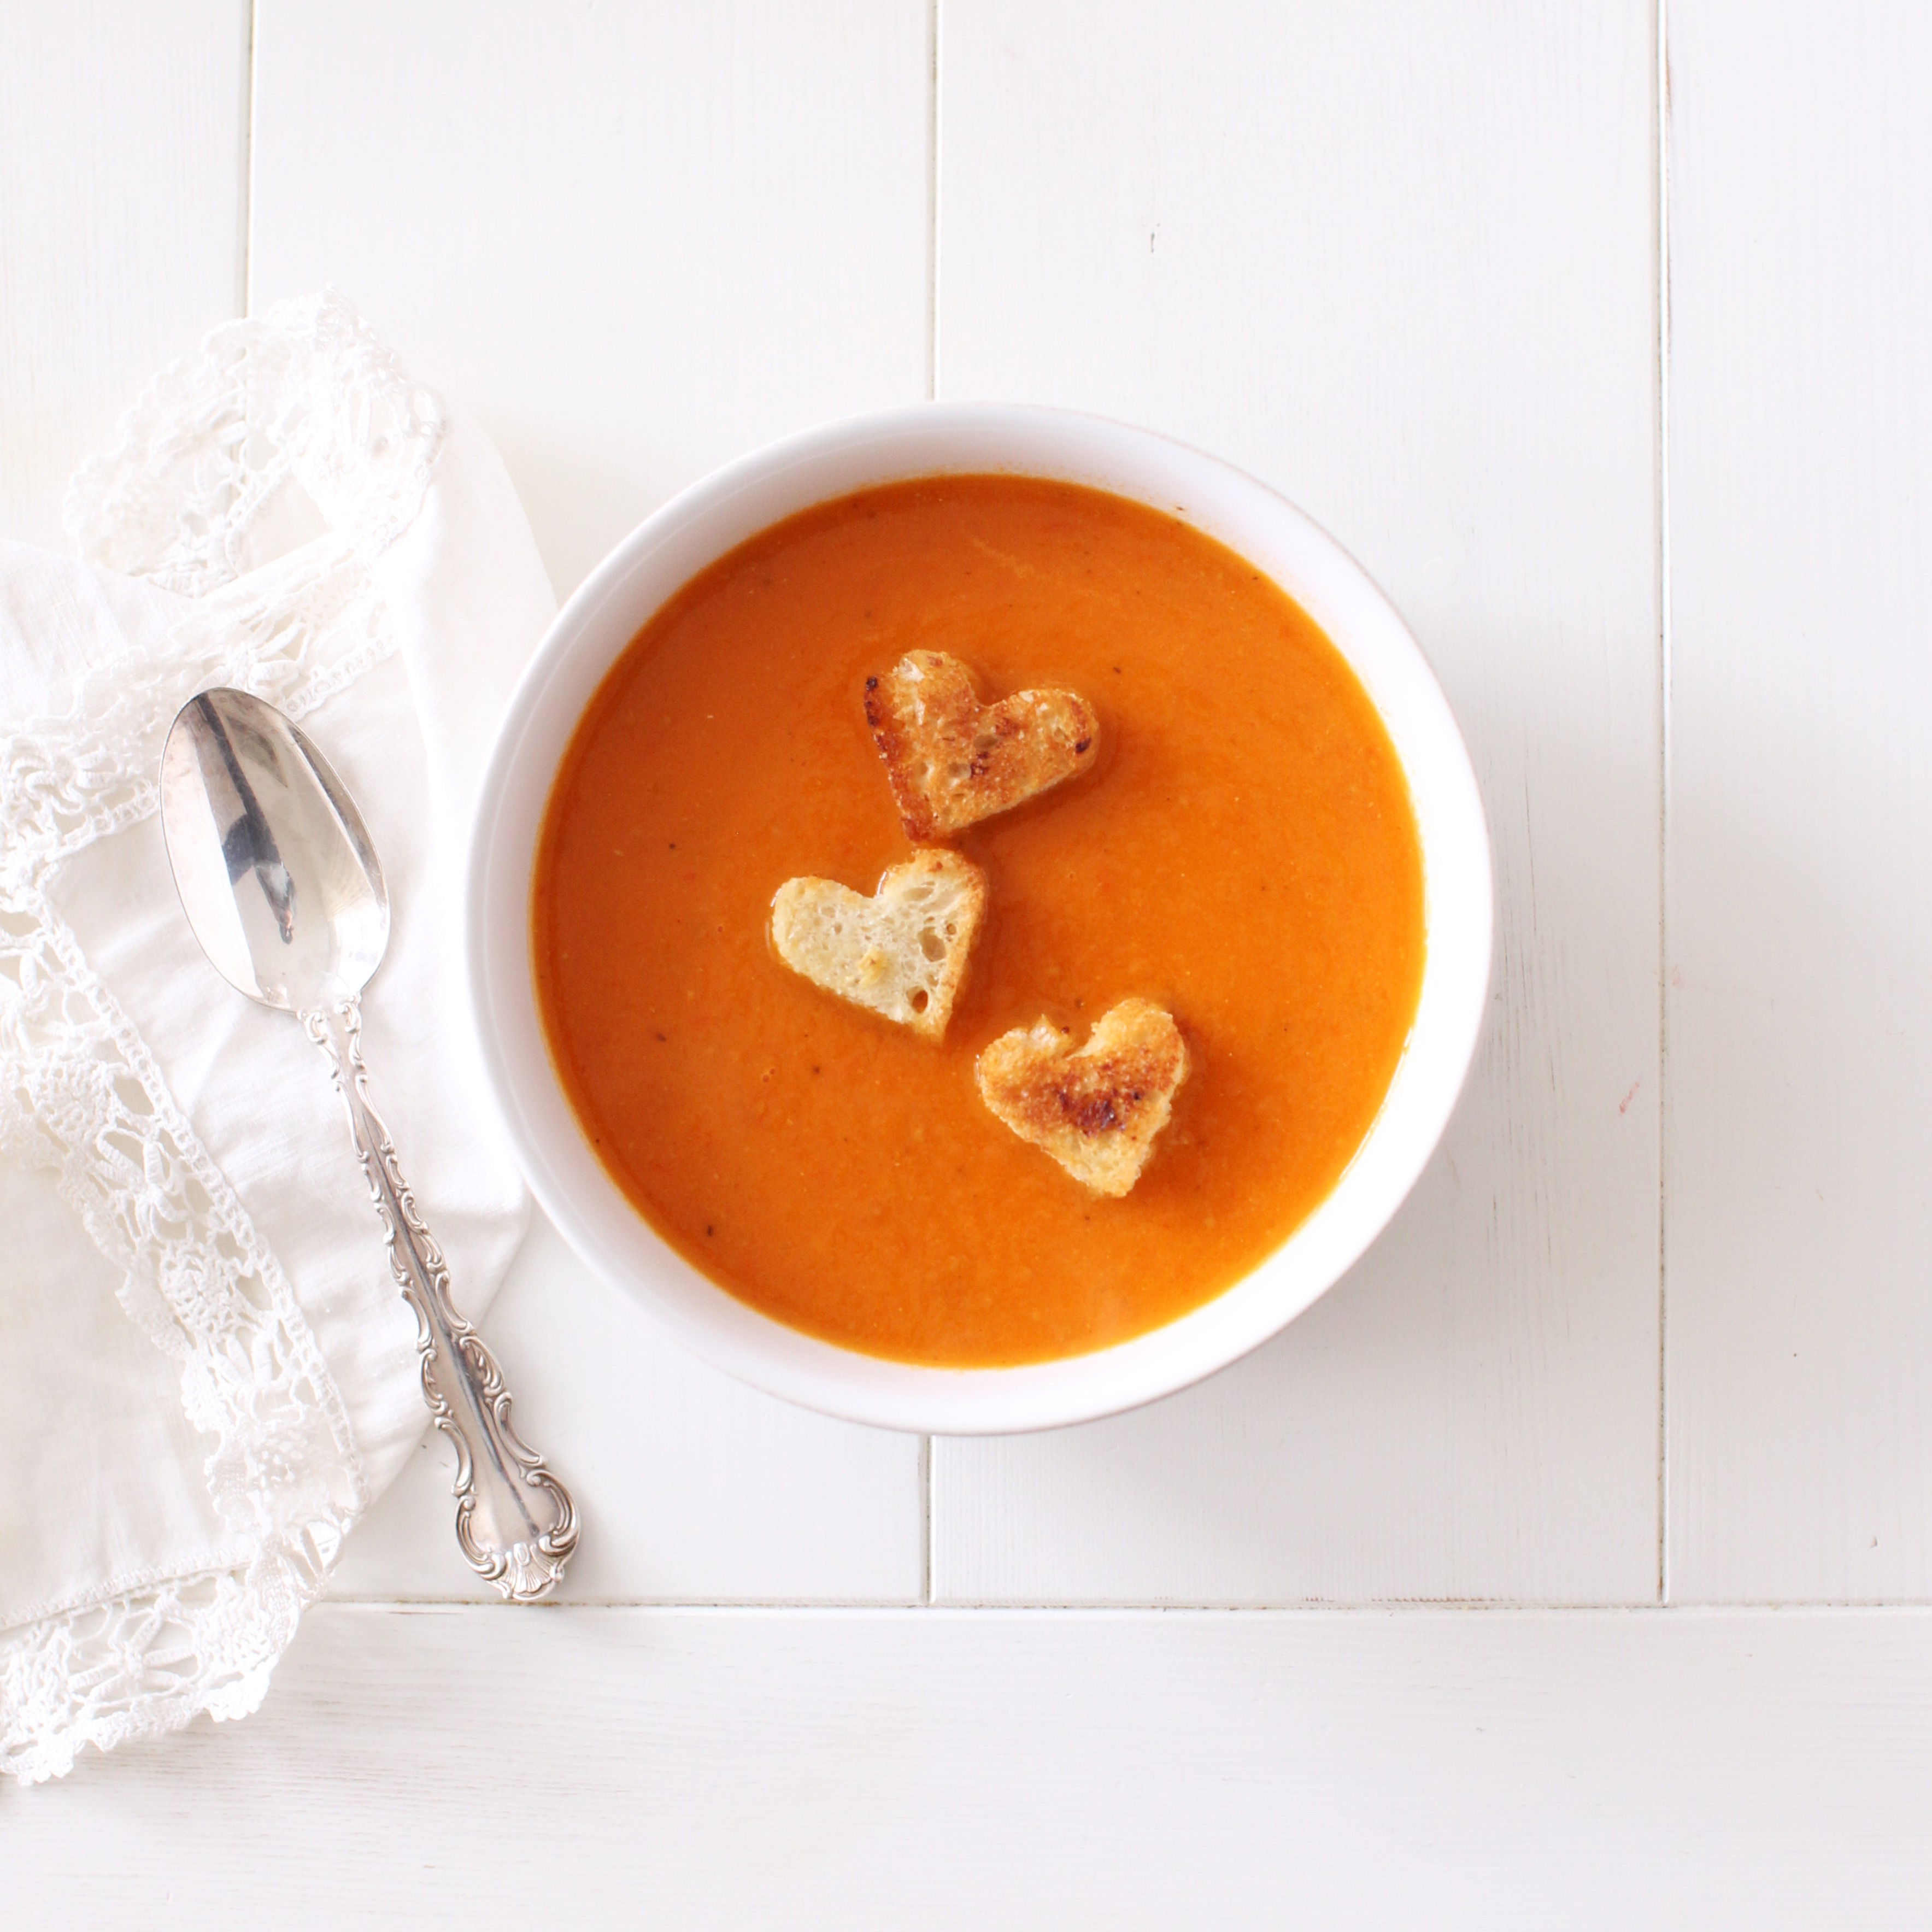 Roasted Tomato Pepper Soup with heart shaped croutons